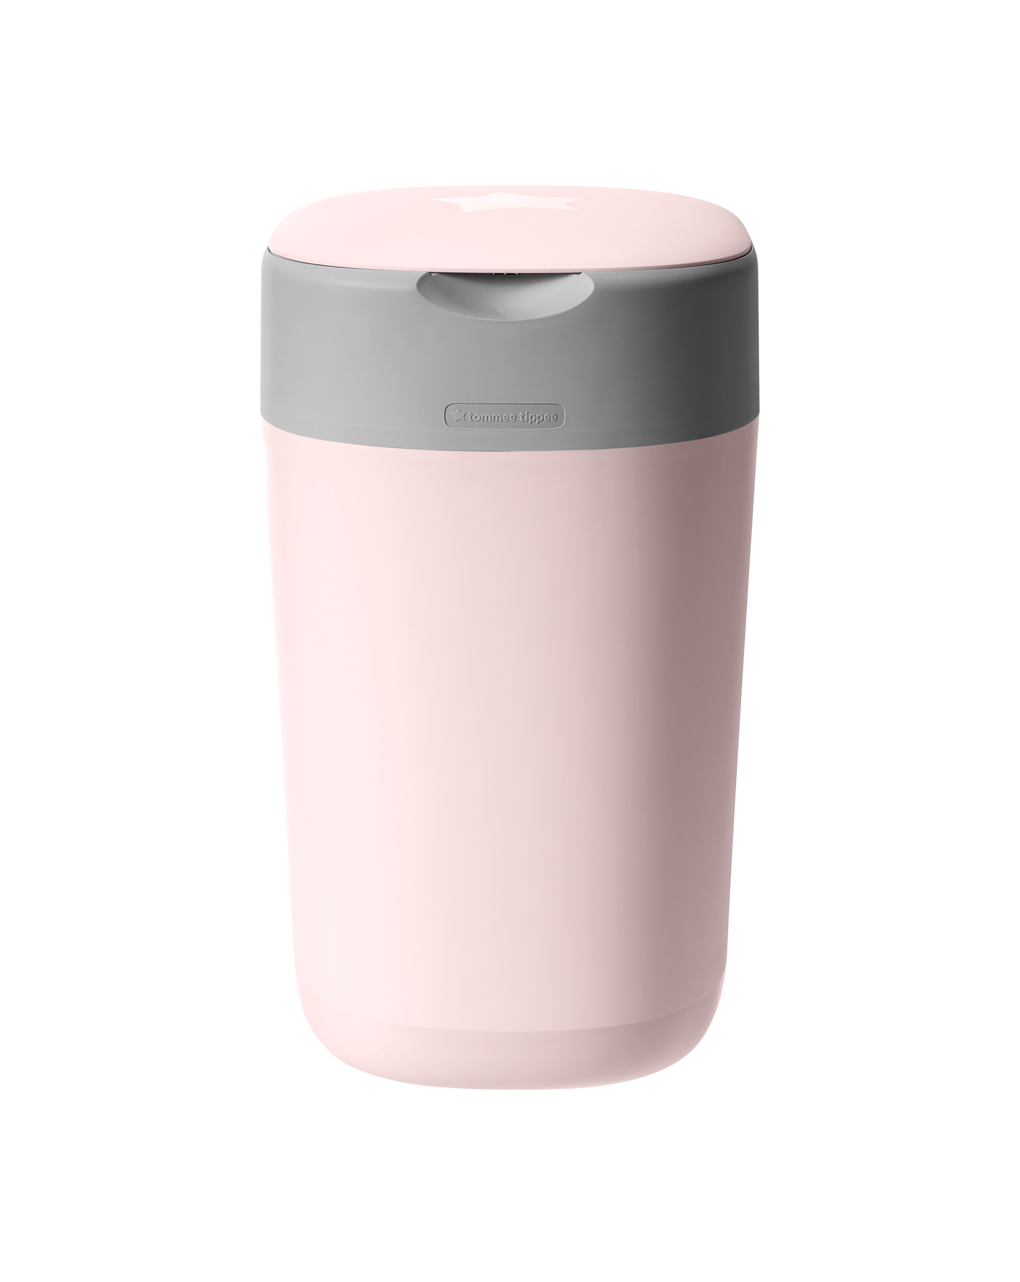 Twist&click contenitore rosa - Tommee Tippee